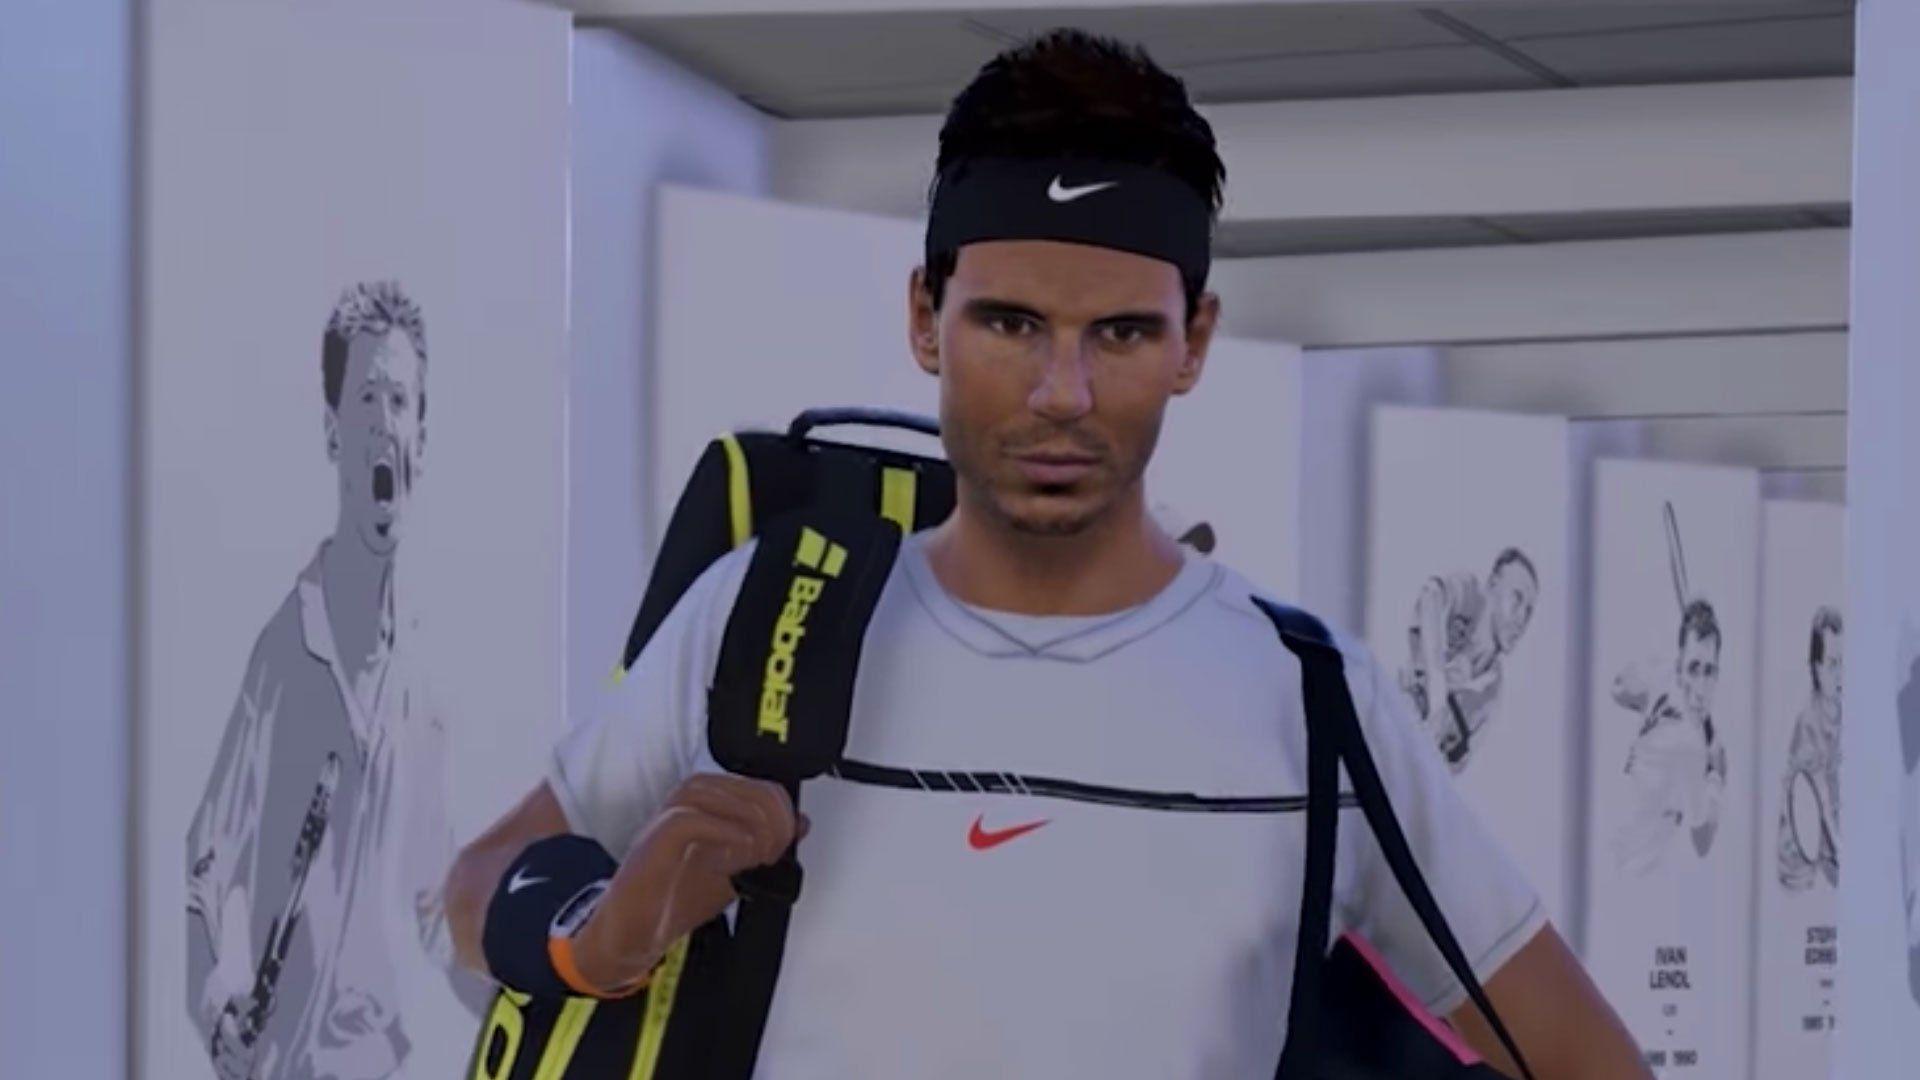 AO Tennis for mobile full roster: All players, detailed here